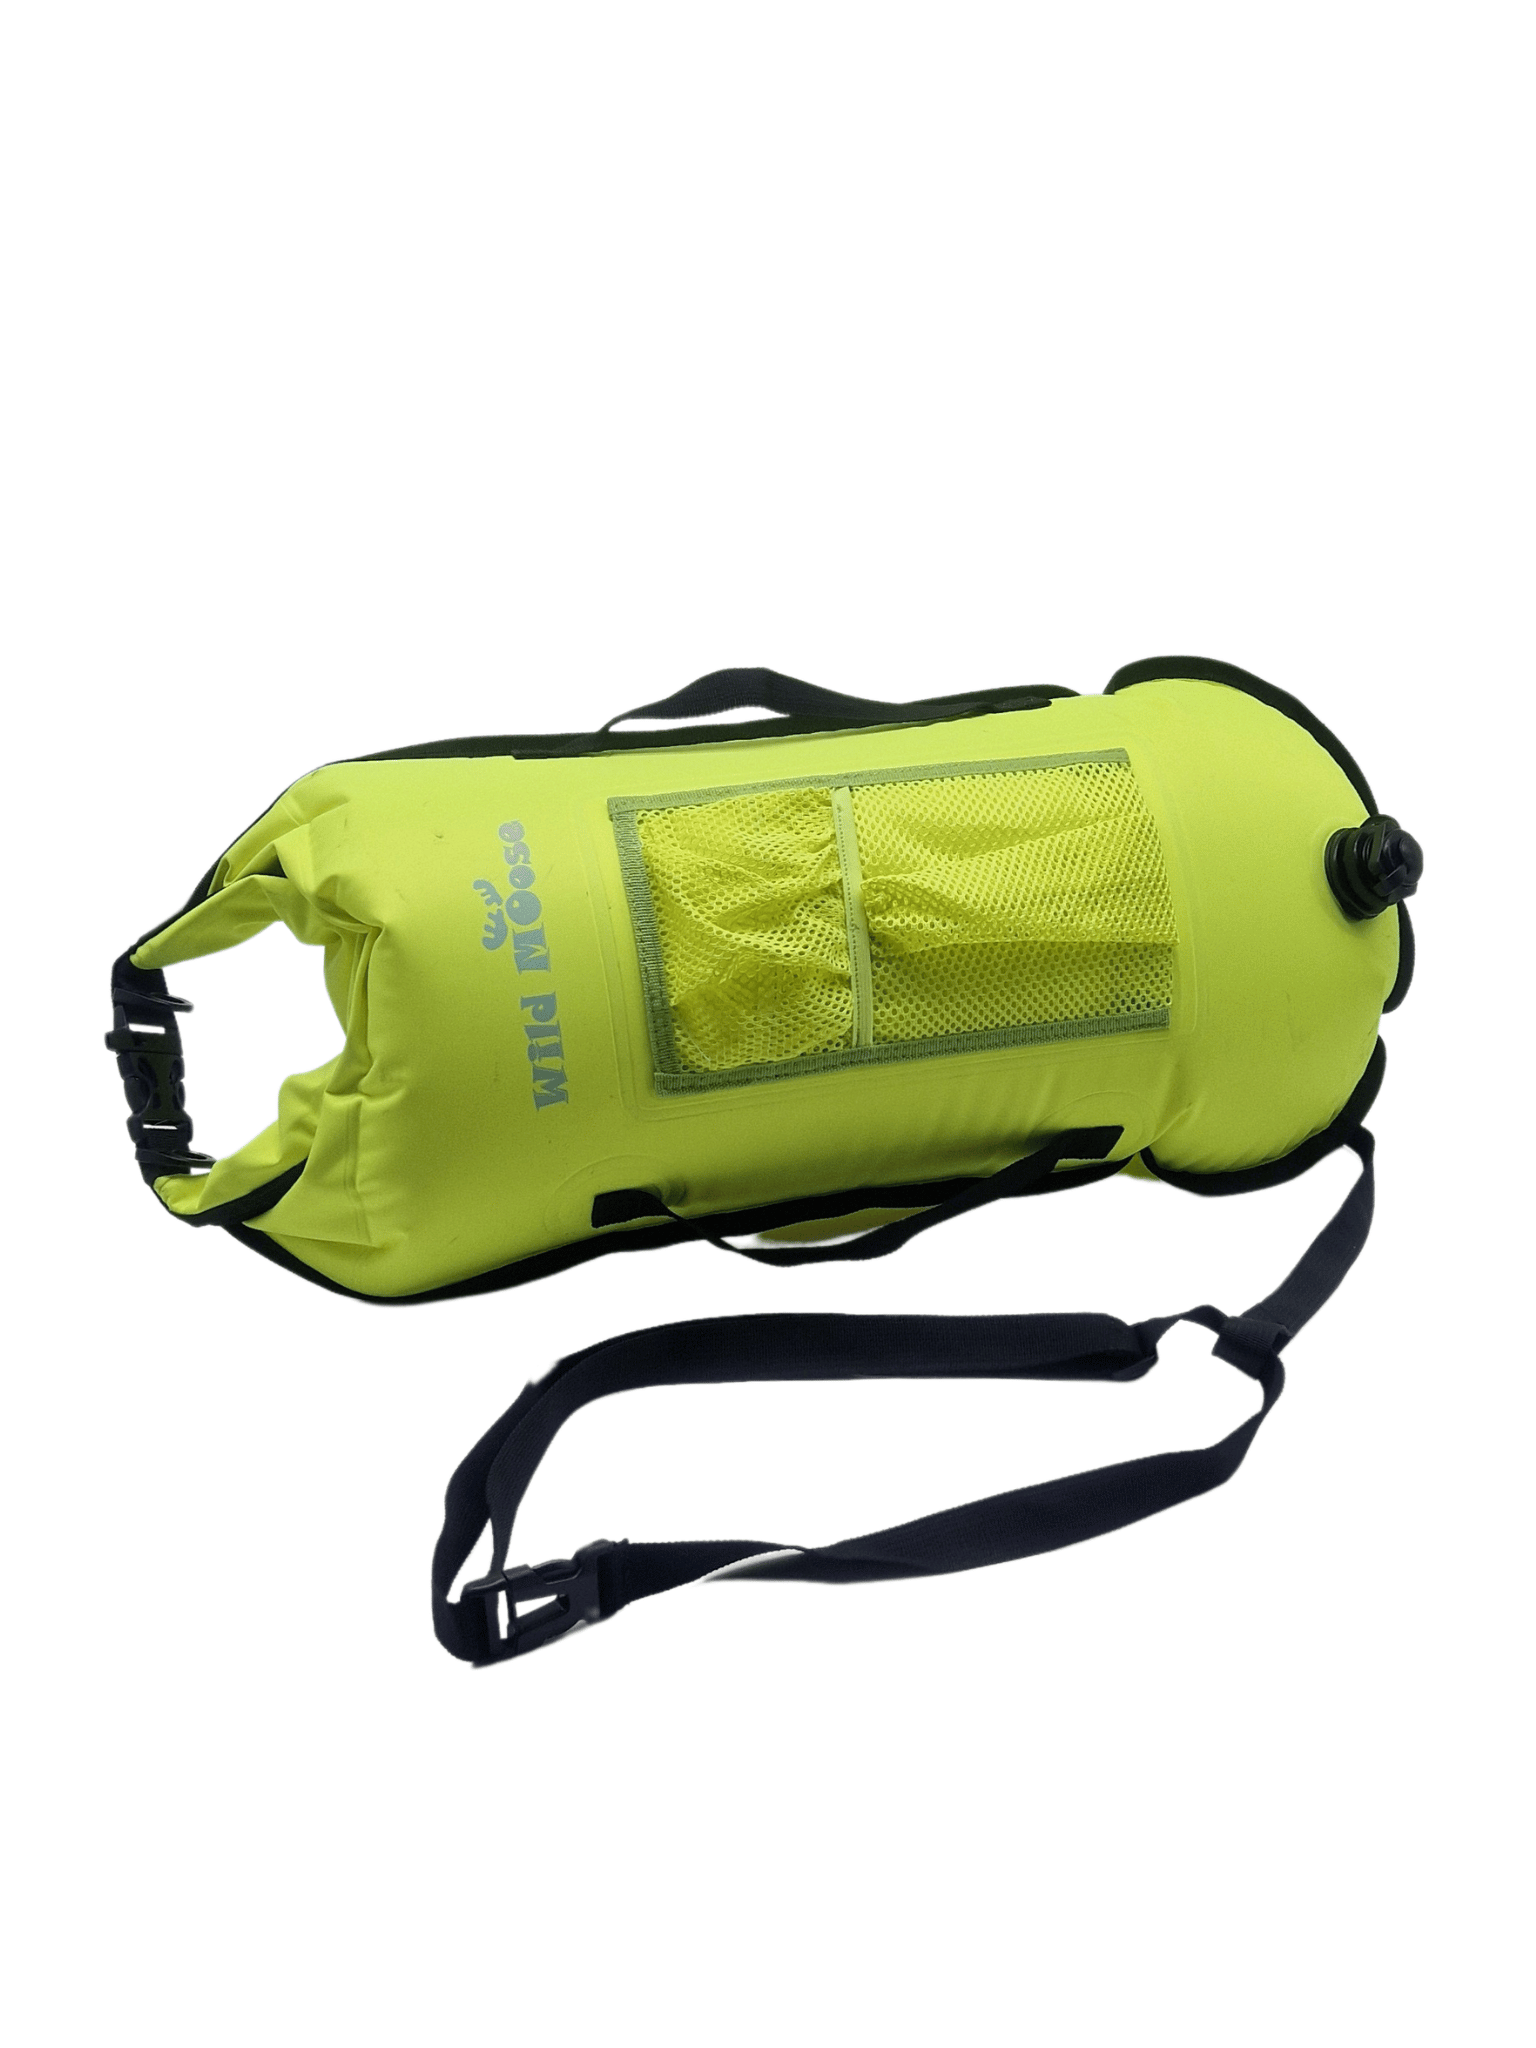 28L neon yellow tow float (on side) with mesh top pocket and black handles and leash